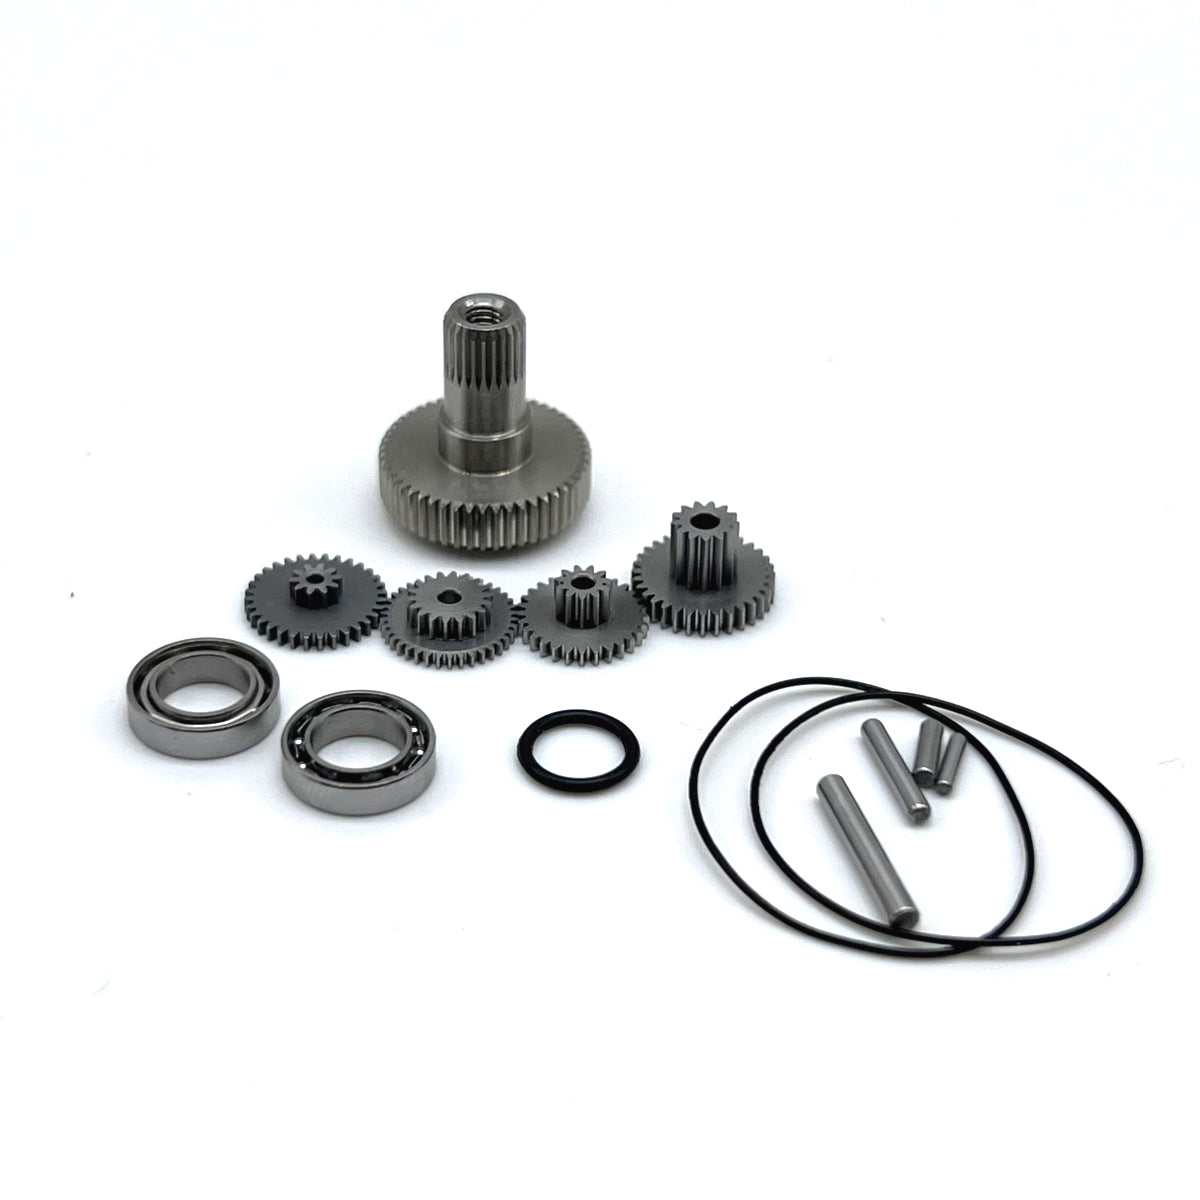 RAW 400LP Replacement Gear Set